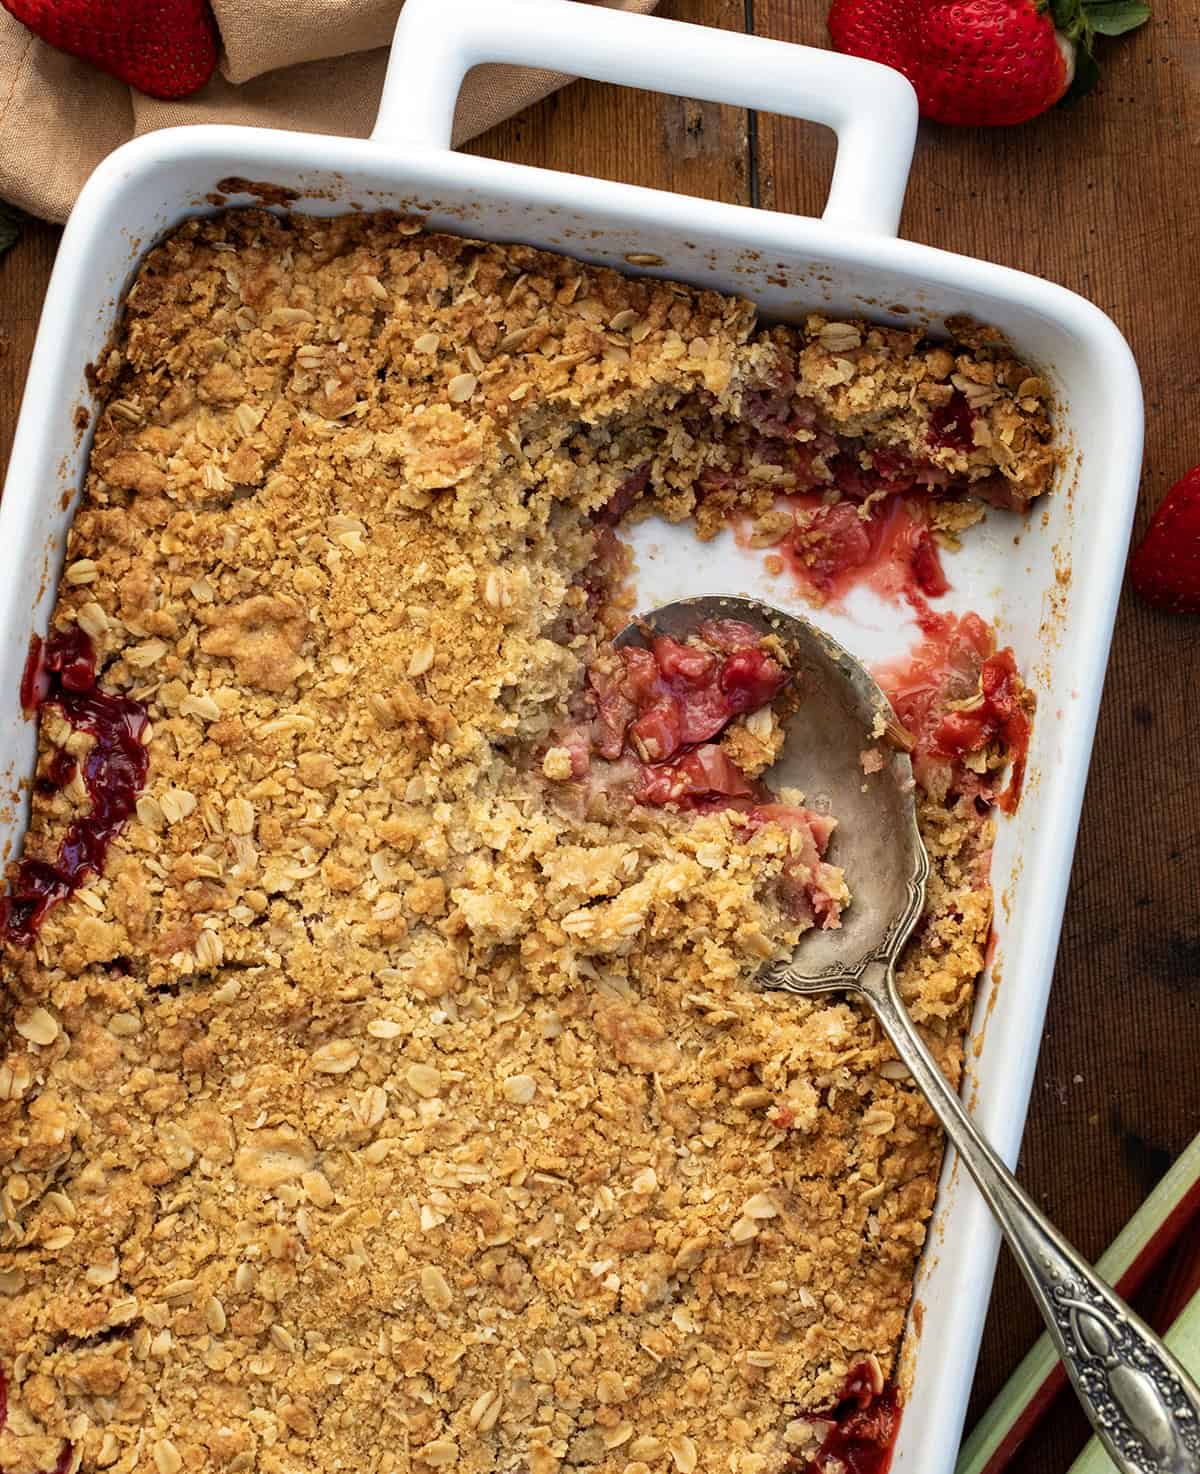 Pan of Strawberry Rhubarb Crisp with a portion removed and a spoon in the pan from overhead.